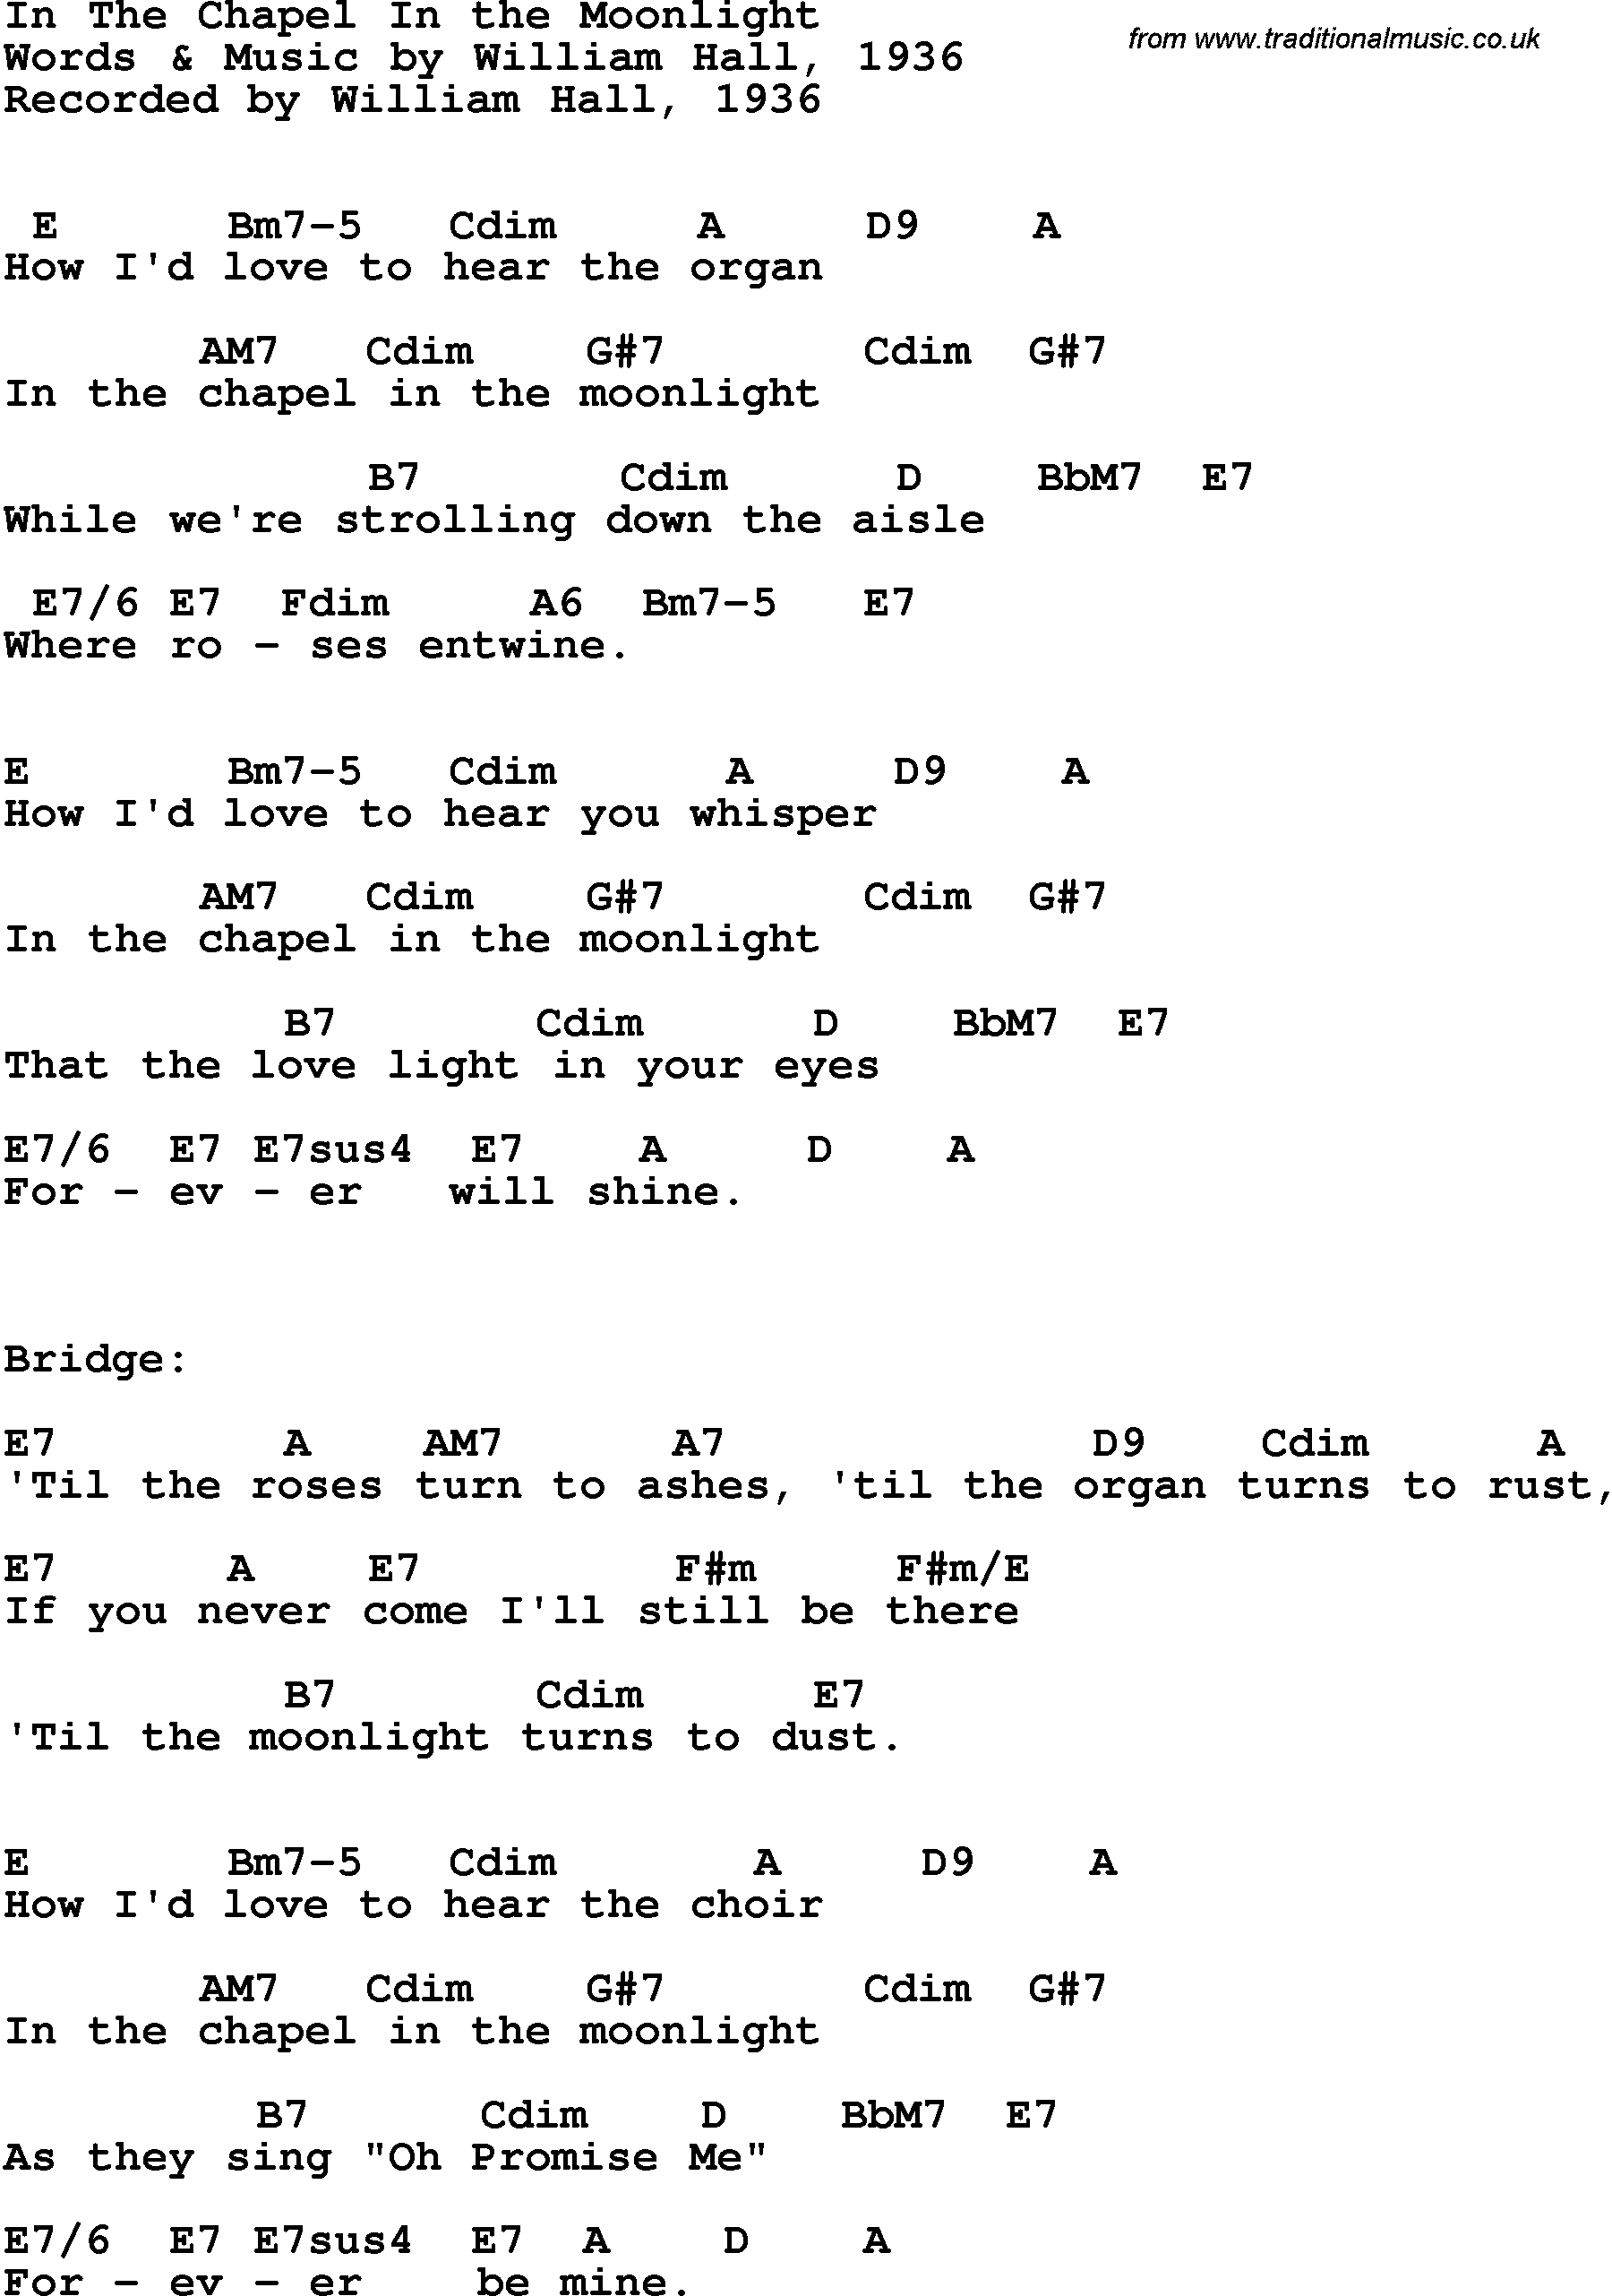 Song Lyrics with guitar chords for In The Chapel In The Moonlinght - Kitty Kallen, 1954